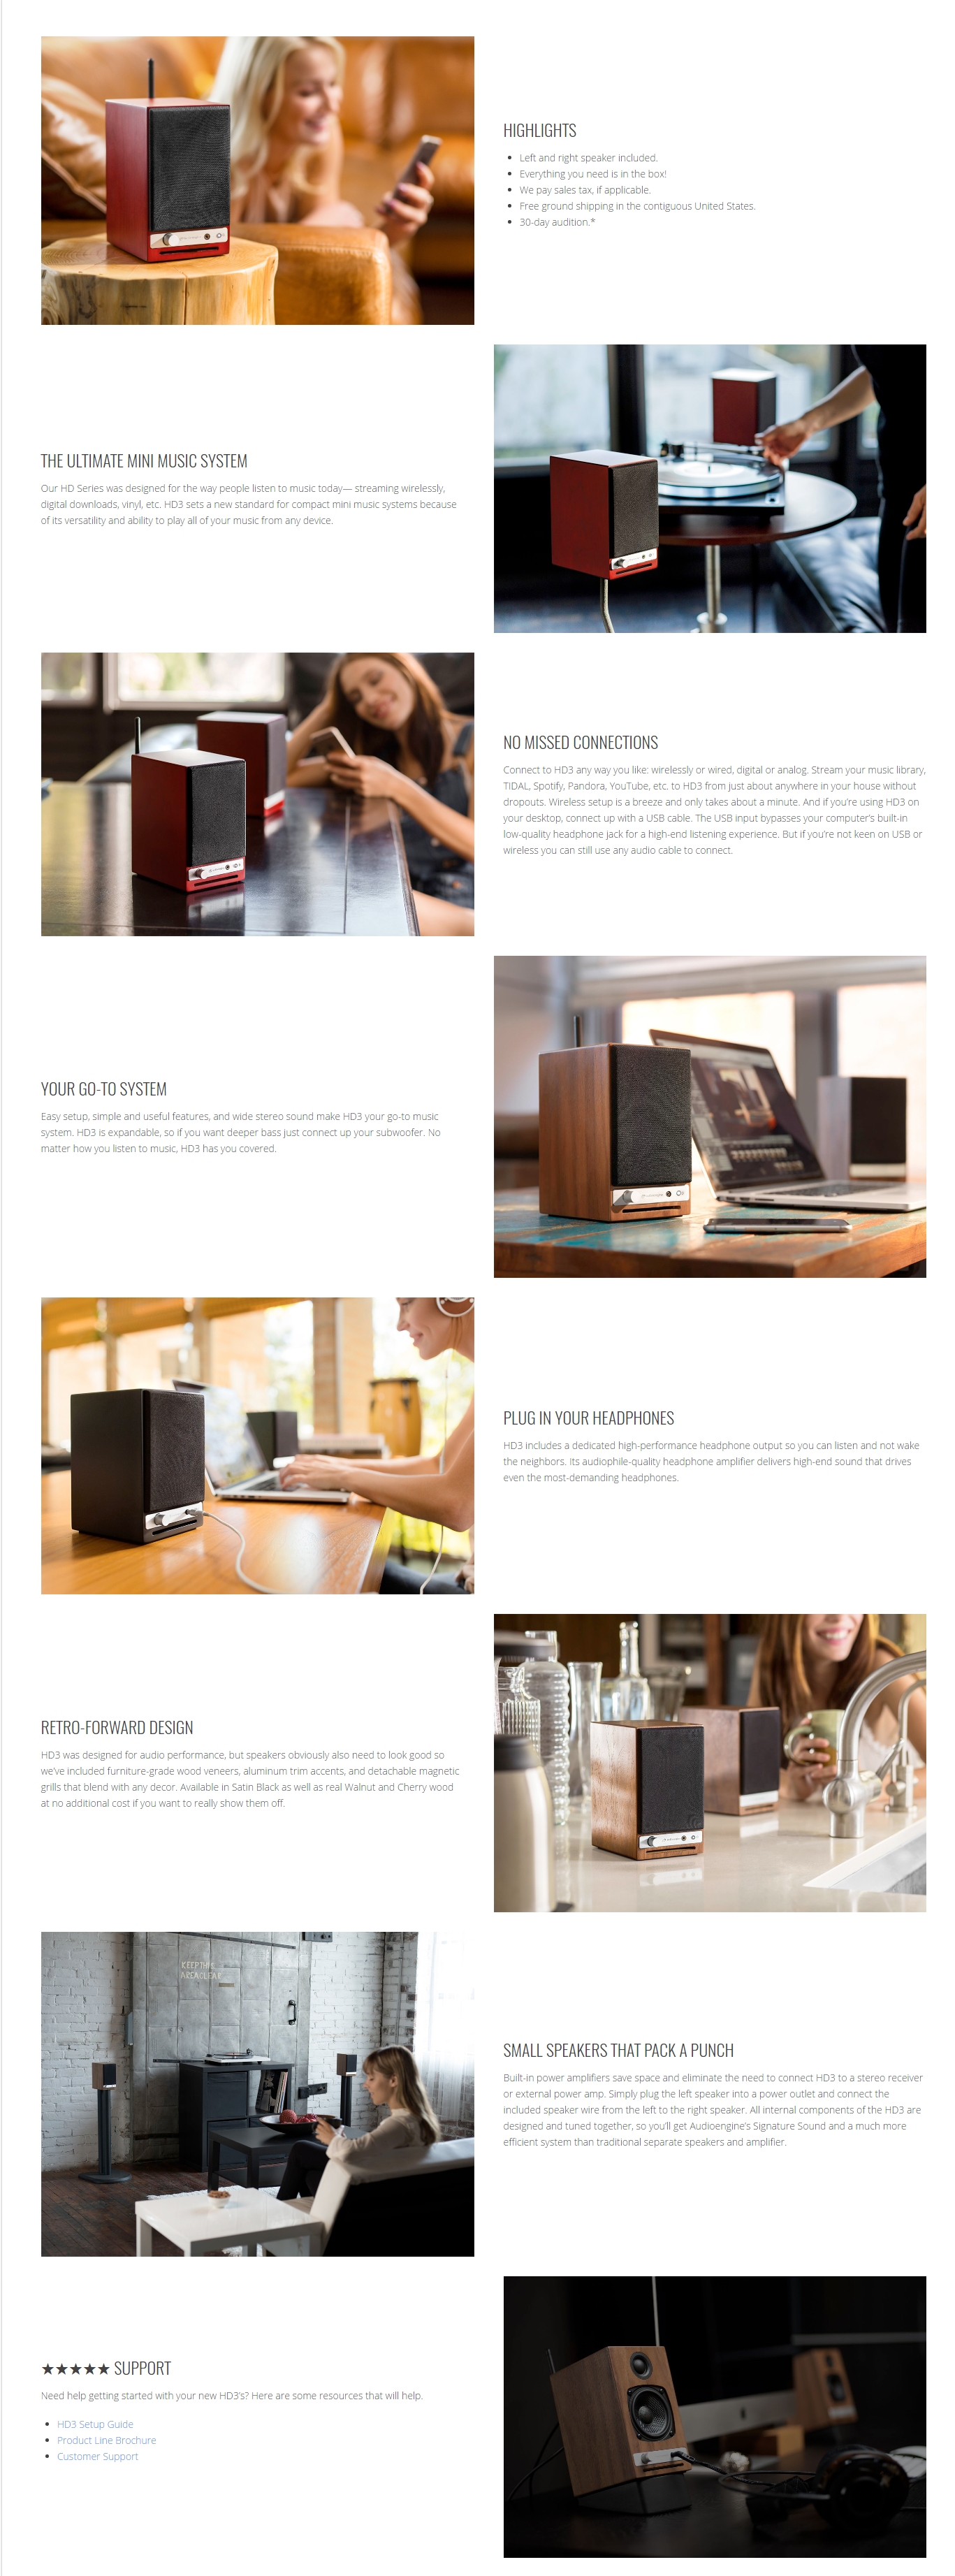 A large marketing image providing additional information about the product Audioengine HD3 - Wireless Desktop Speakers (Walnut) - Additional alt info not provided